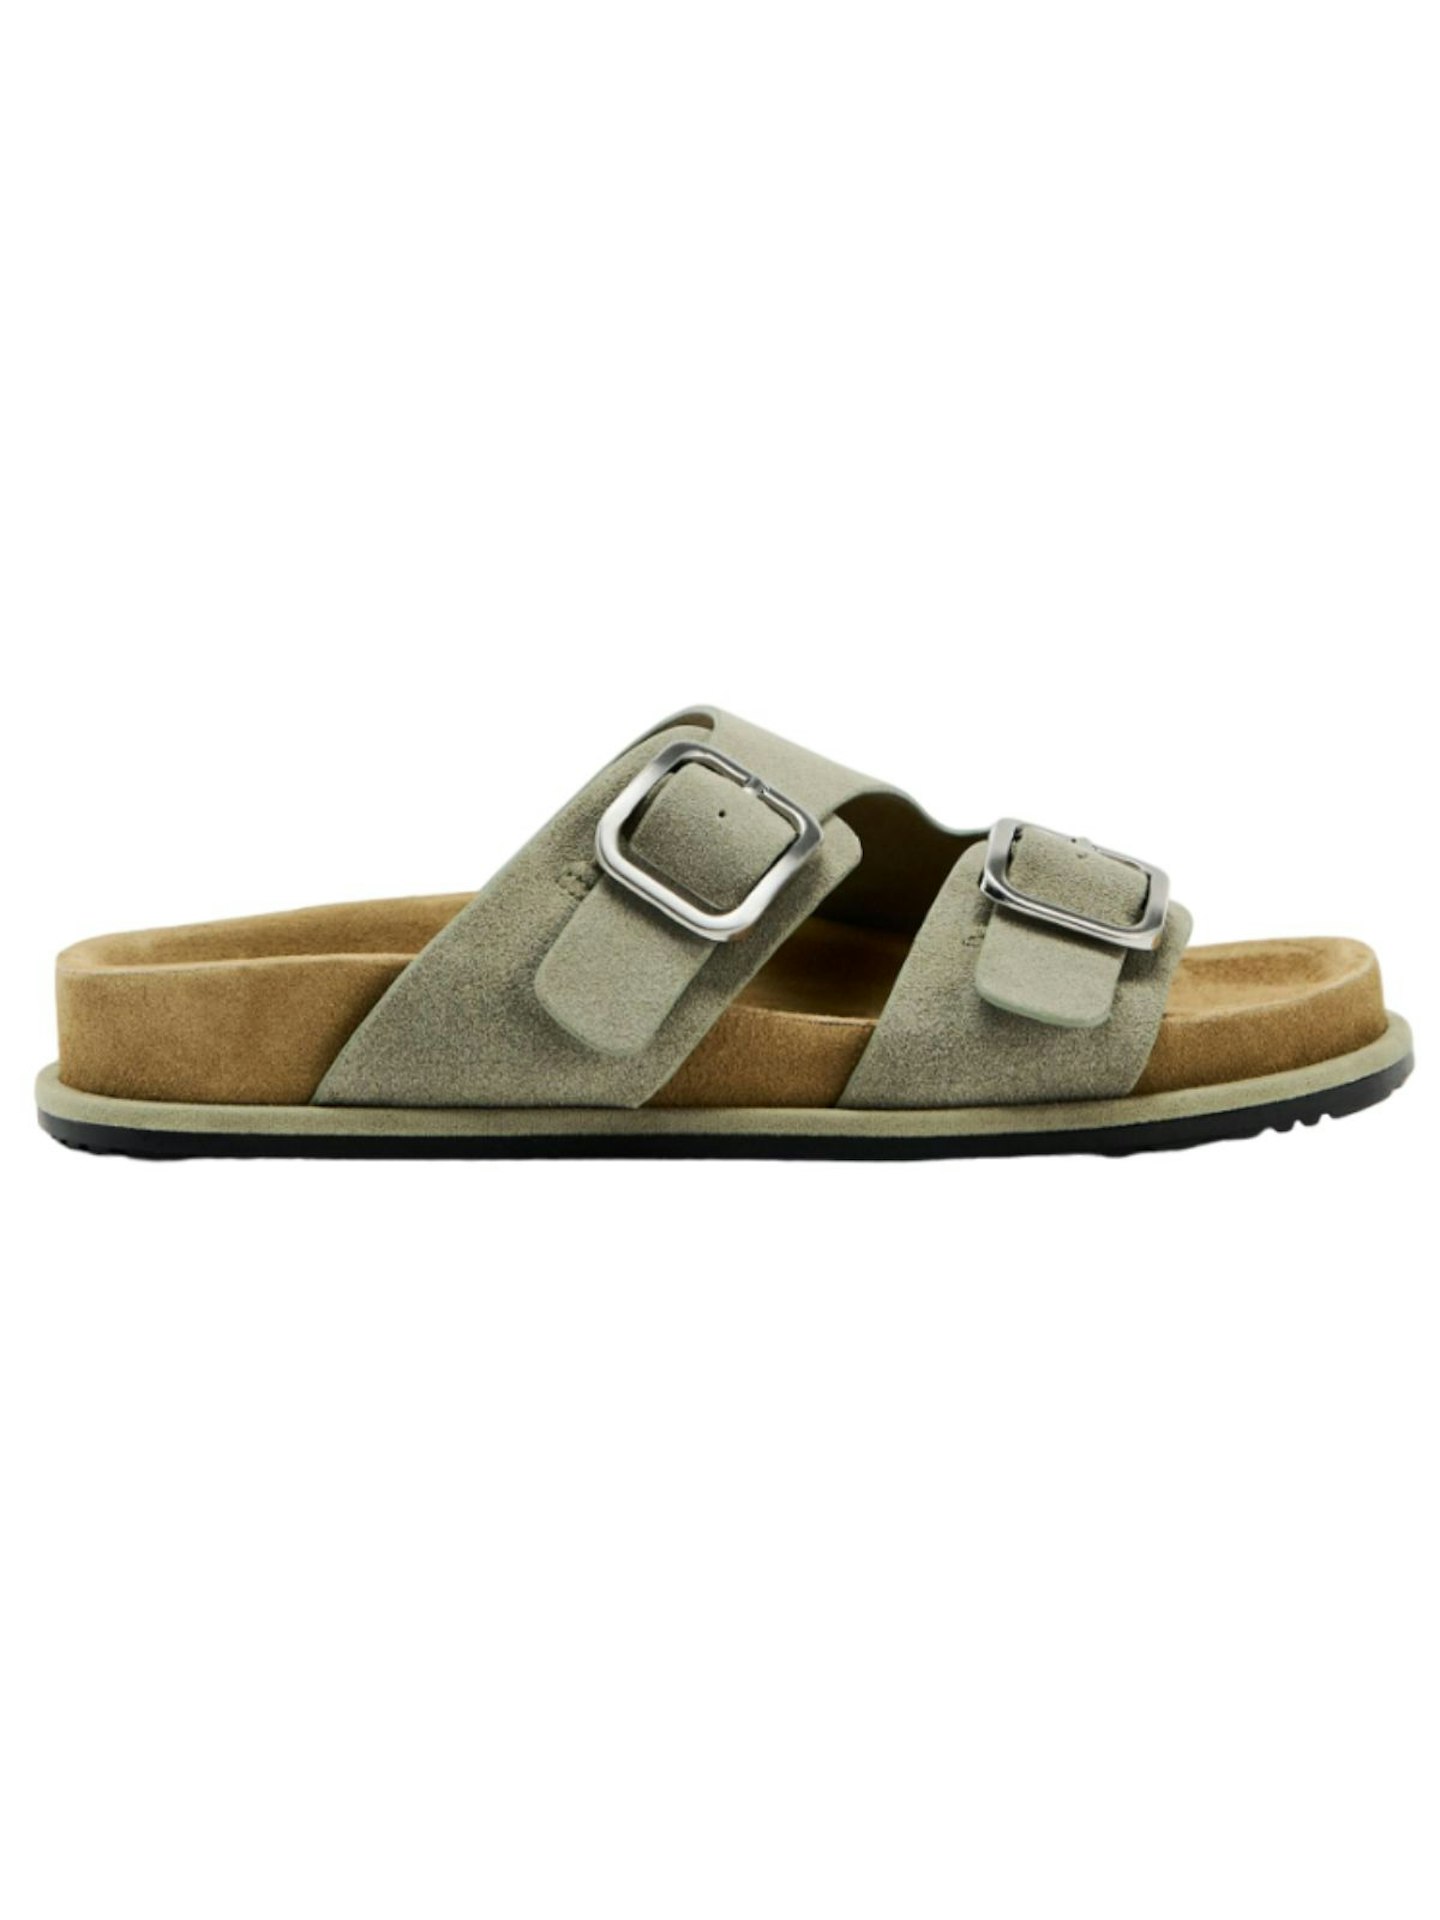 Split Leather Sandals With Buckles